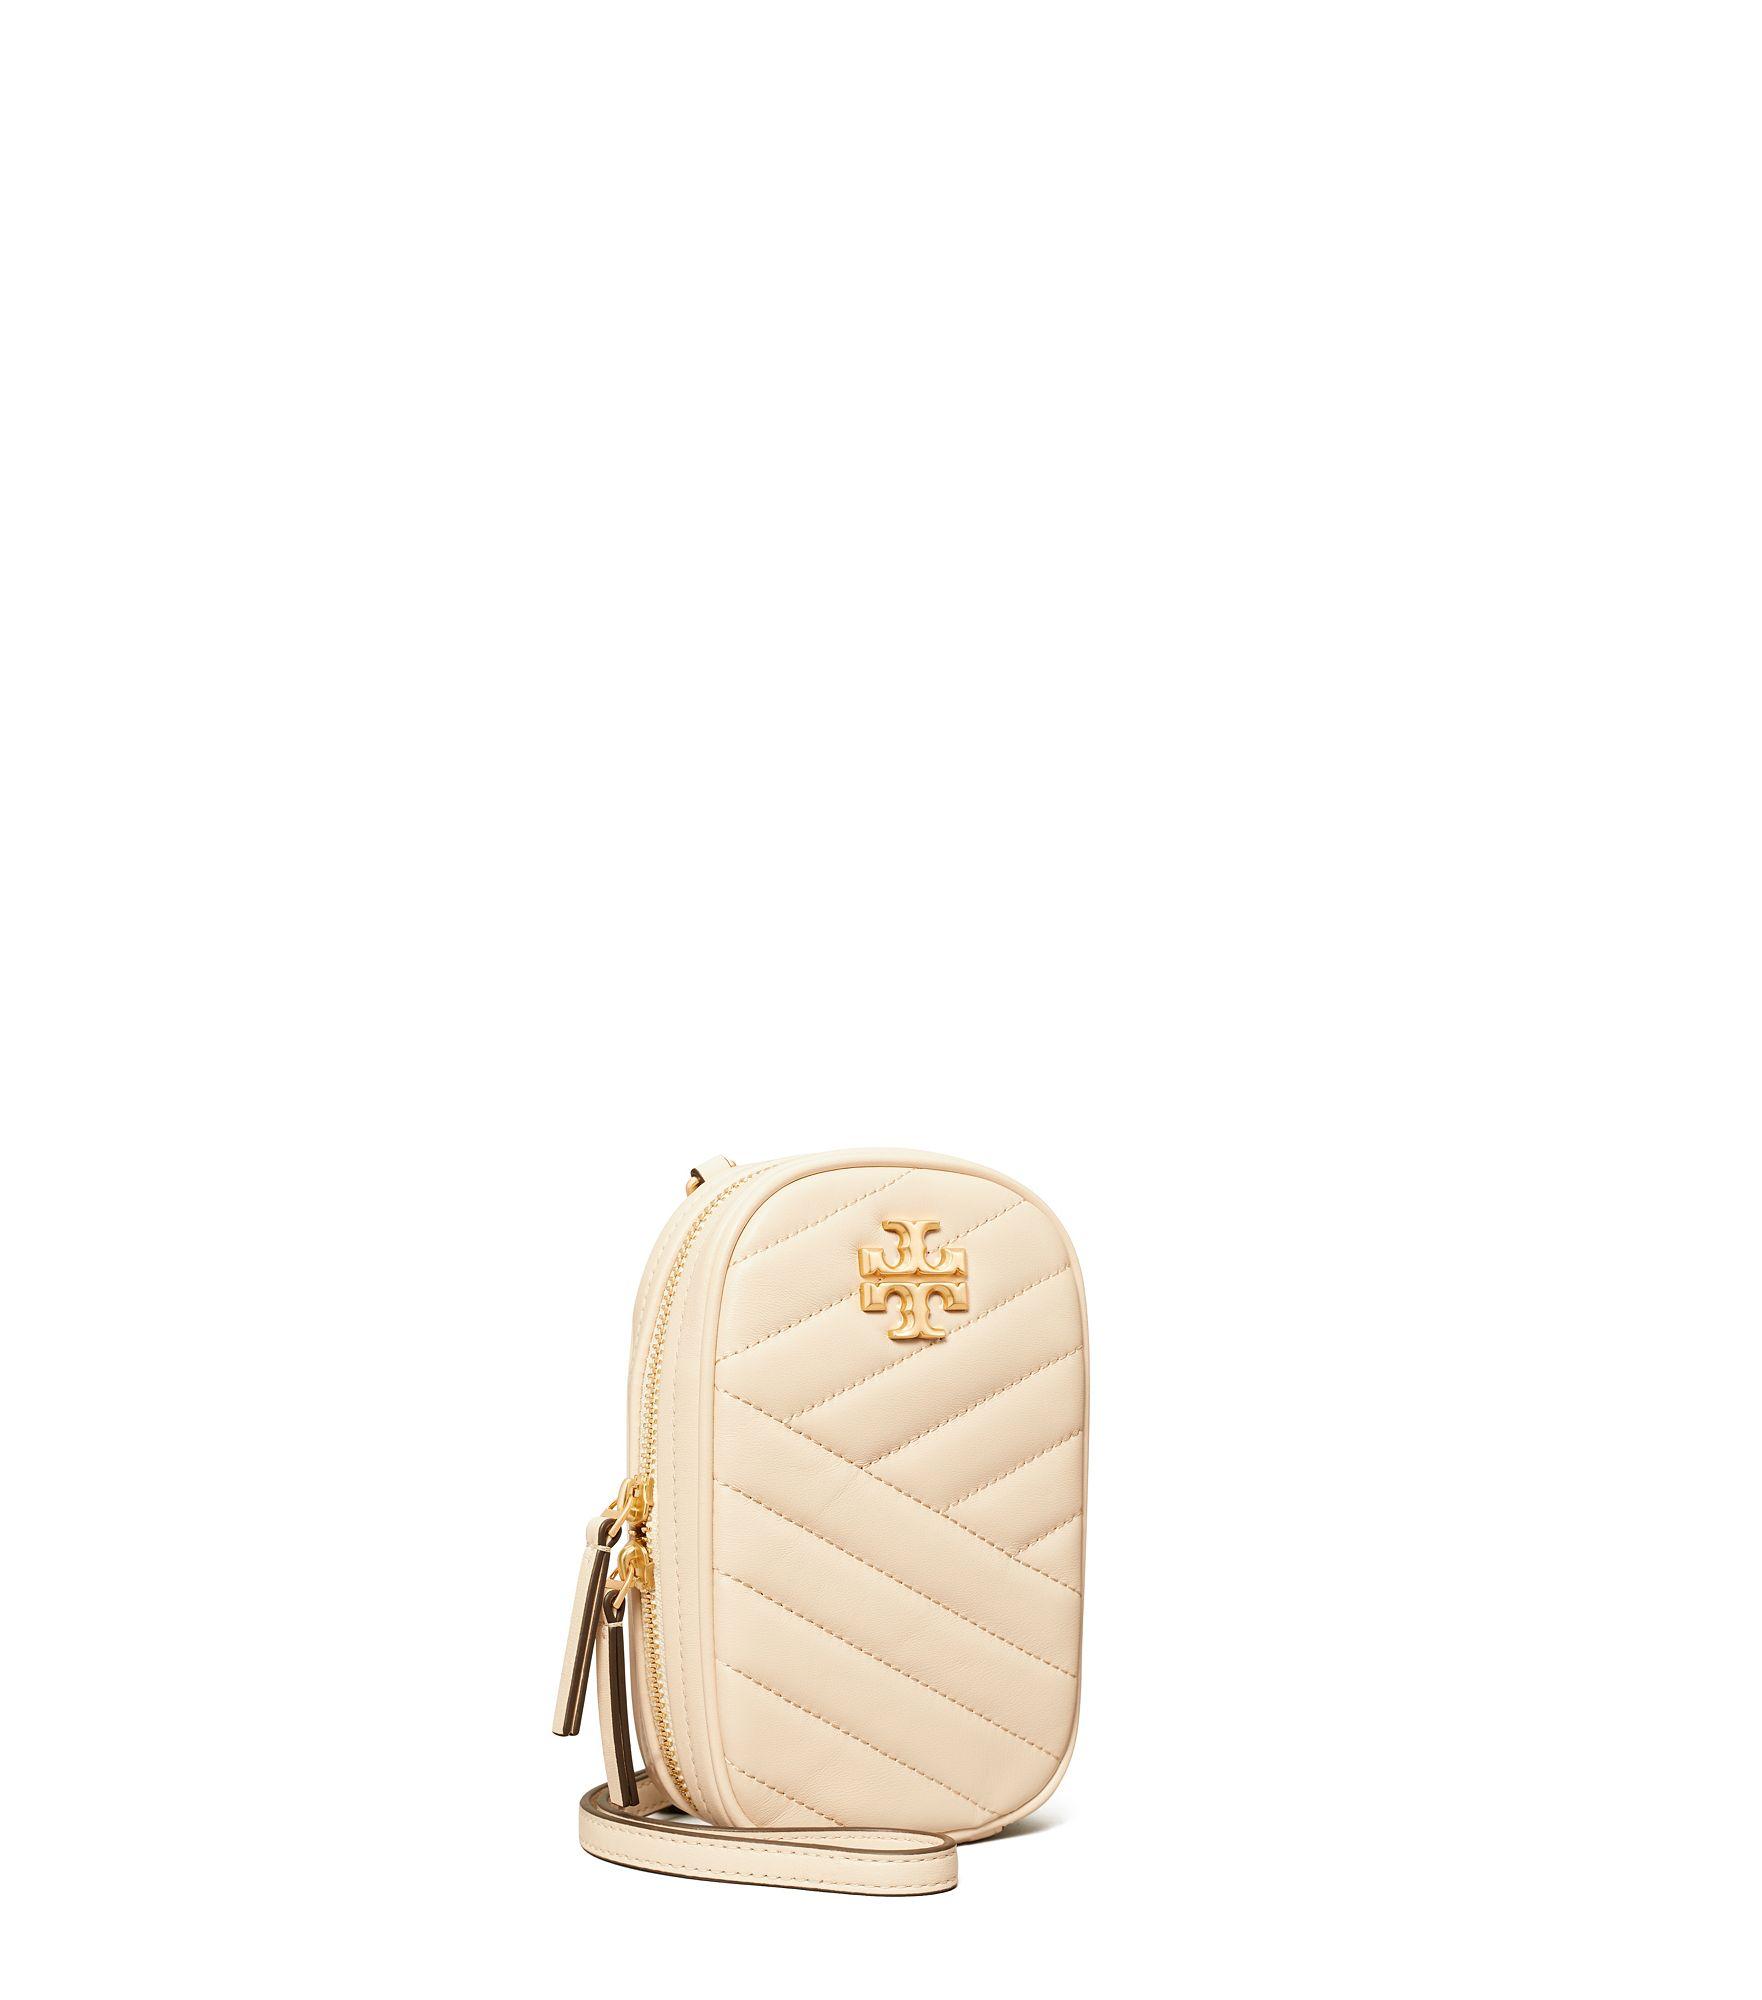 Lavender CloudNew Ivory Small T Monogram Bag With Contrast Embossing  TORY  BURCH  Russocapri